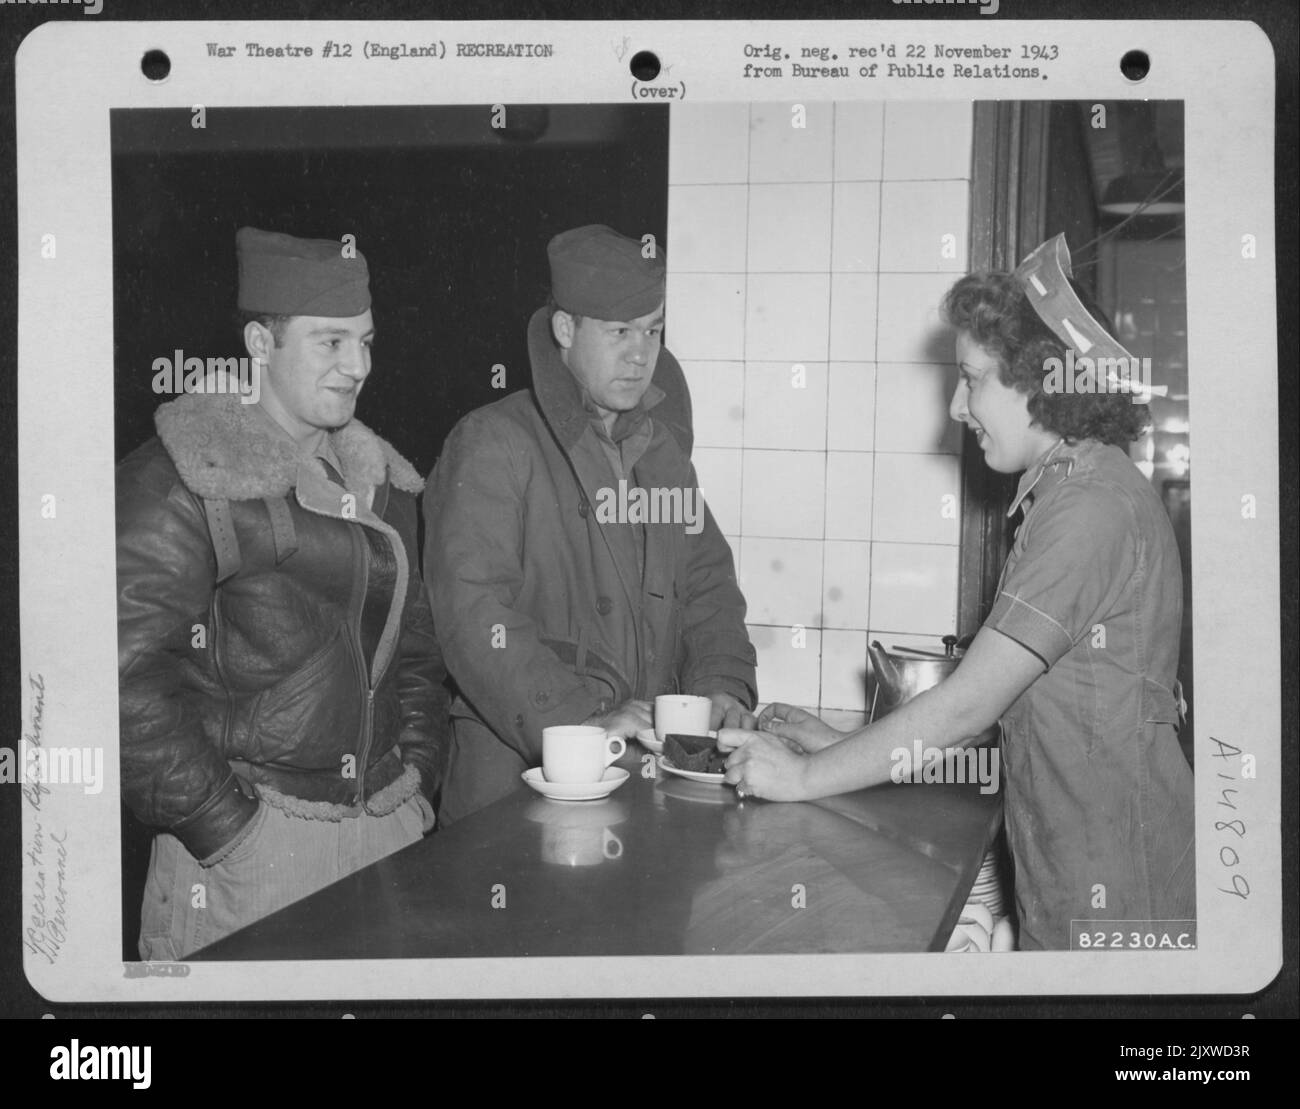 The British Naafi (Navy, Army, Air Force Institute) Which Maintained Canteens On The Bleak, Wind-Swept Bomber Stations Until The American Red Cross Was Able To Take Over, Did A Magnificent Job. Here, Dorine Oakley (Naafi) Serves Tea To Pvt. Hy Phillips, Stock Photo